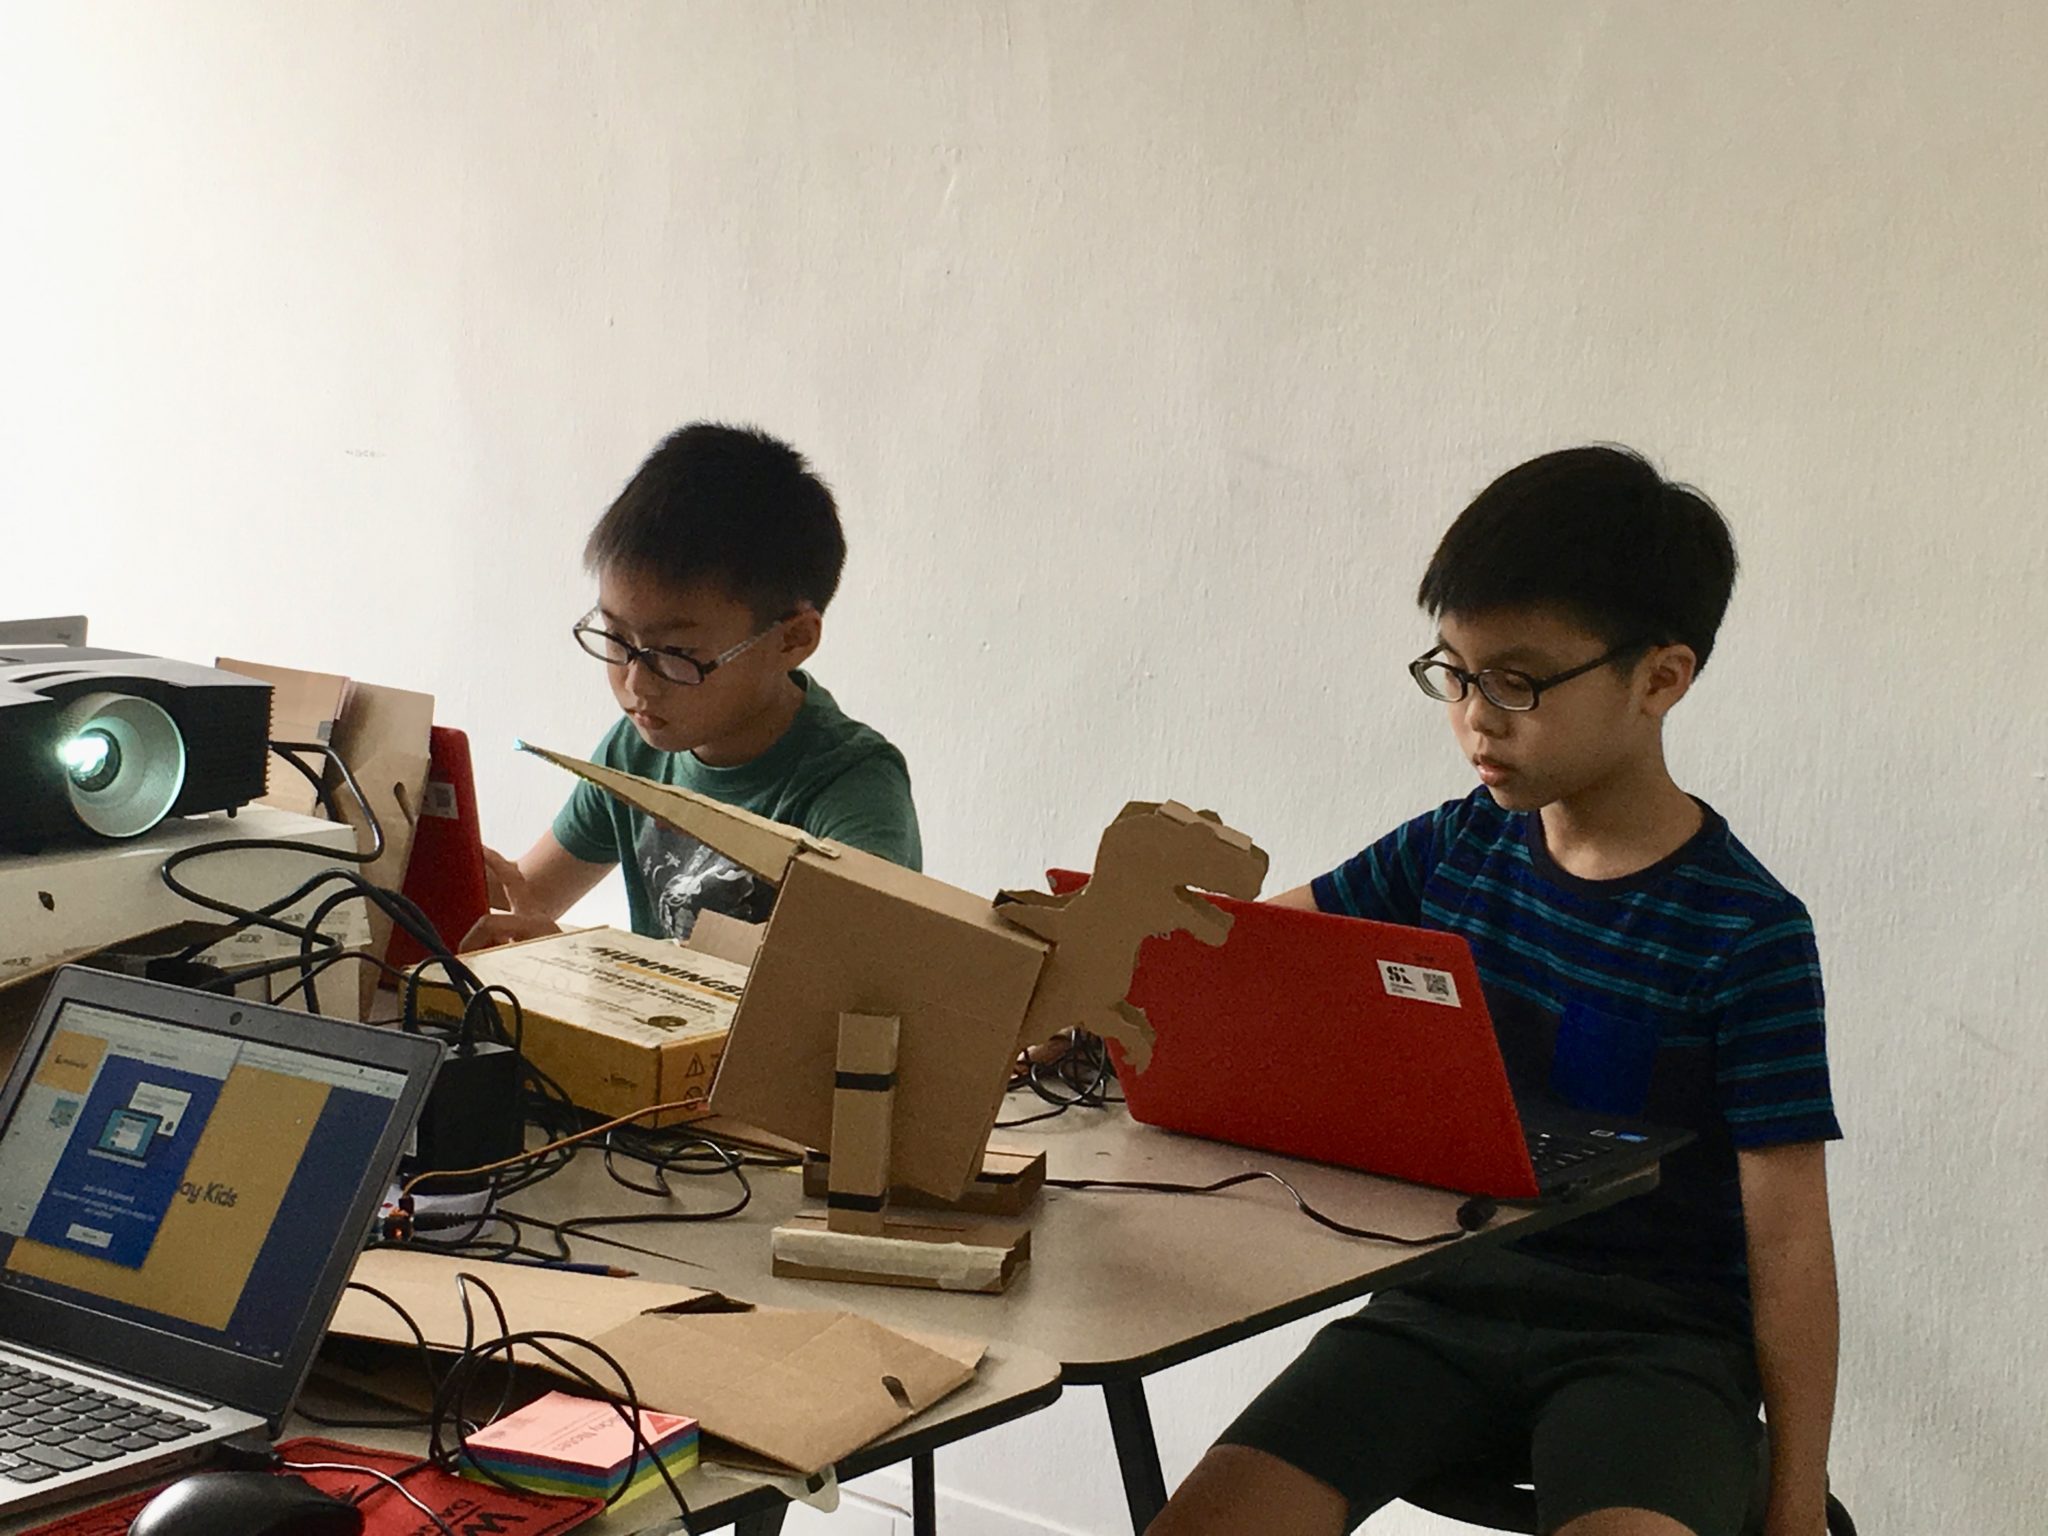 Parent Perspectives: Why I Sent my Son to Weekly Coding Classes